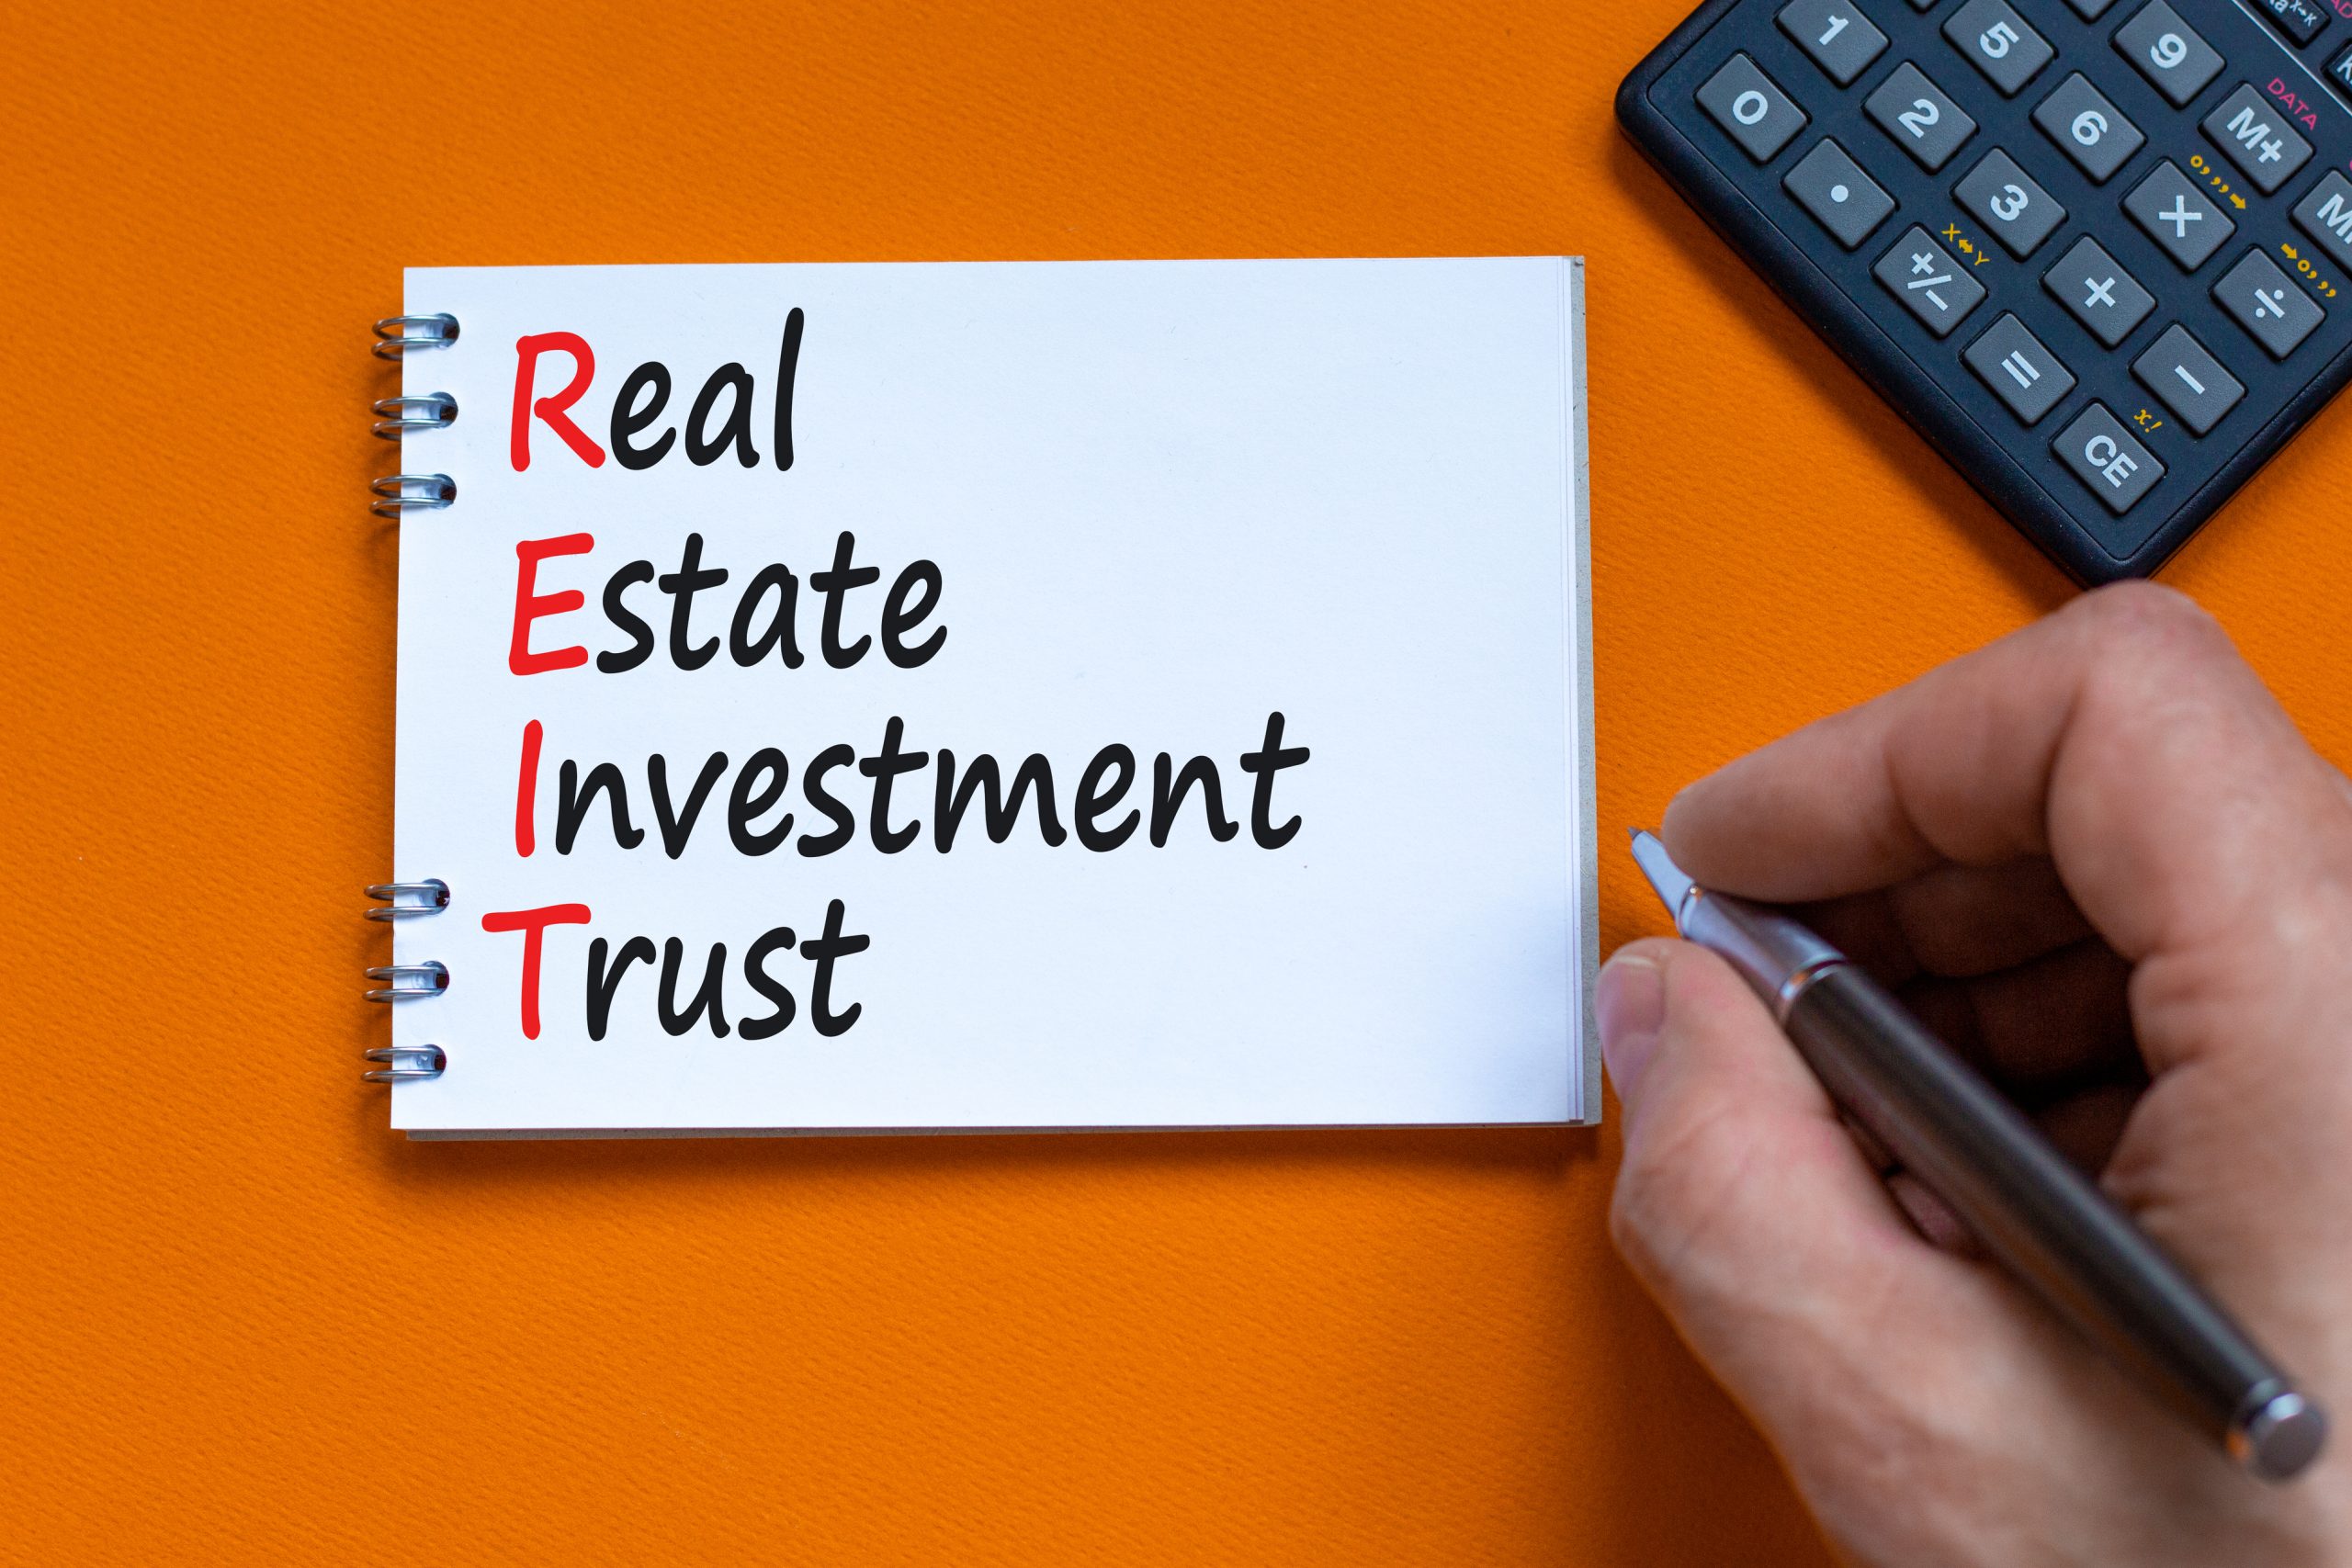 What is a Real Estate Investment Trust (REIT)? Integrity Financial Planning